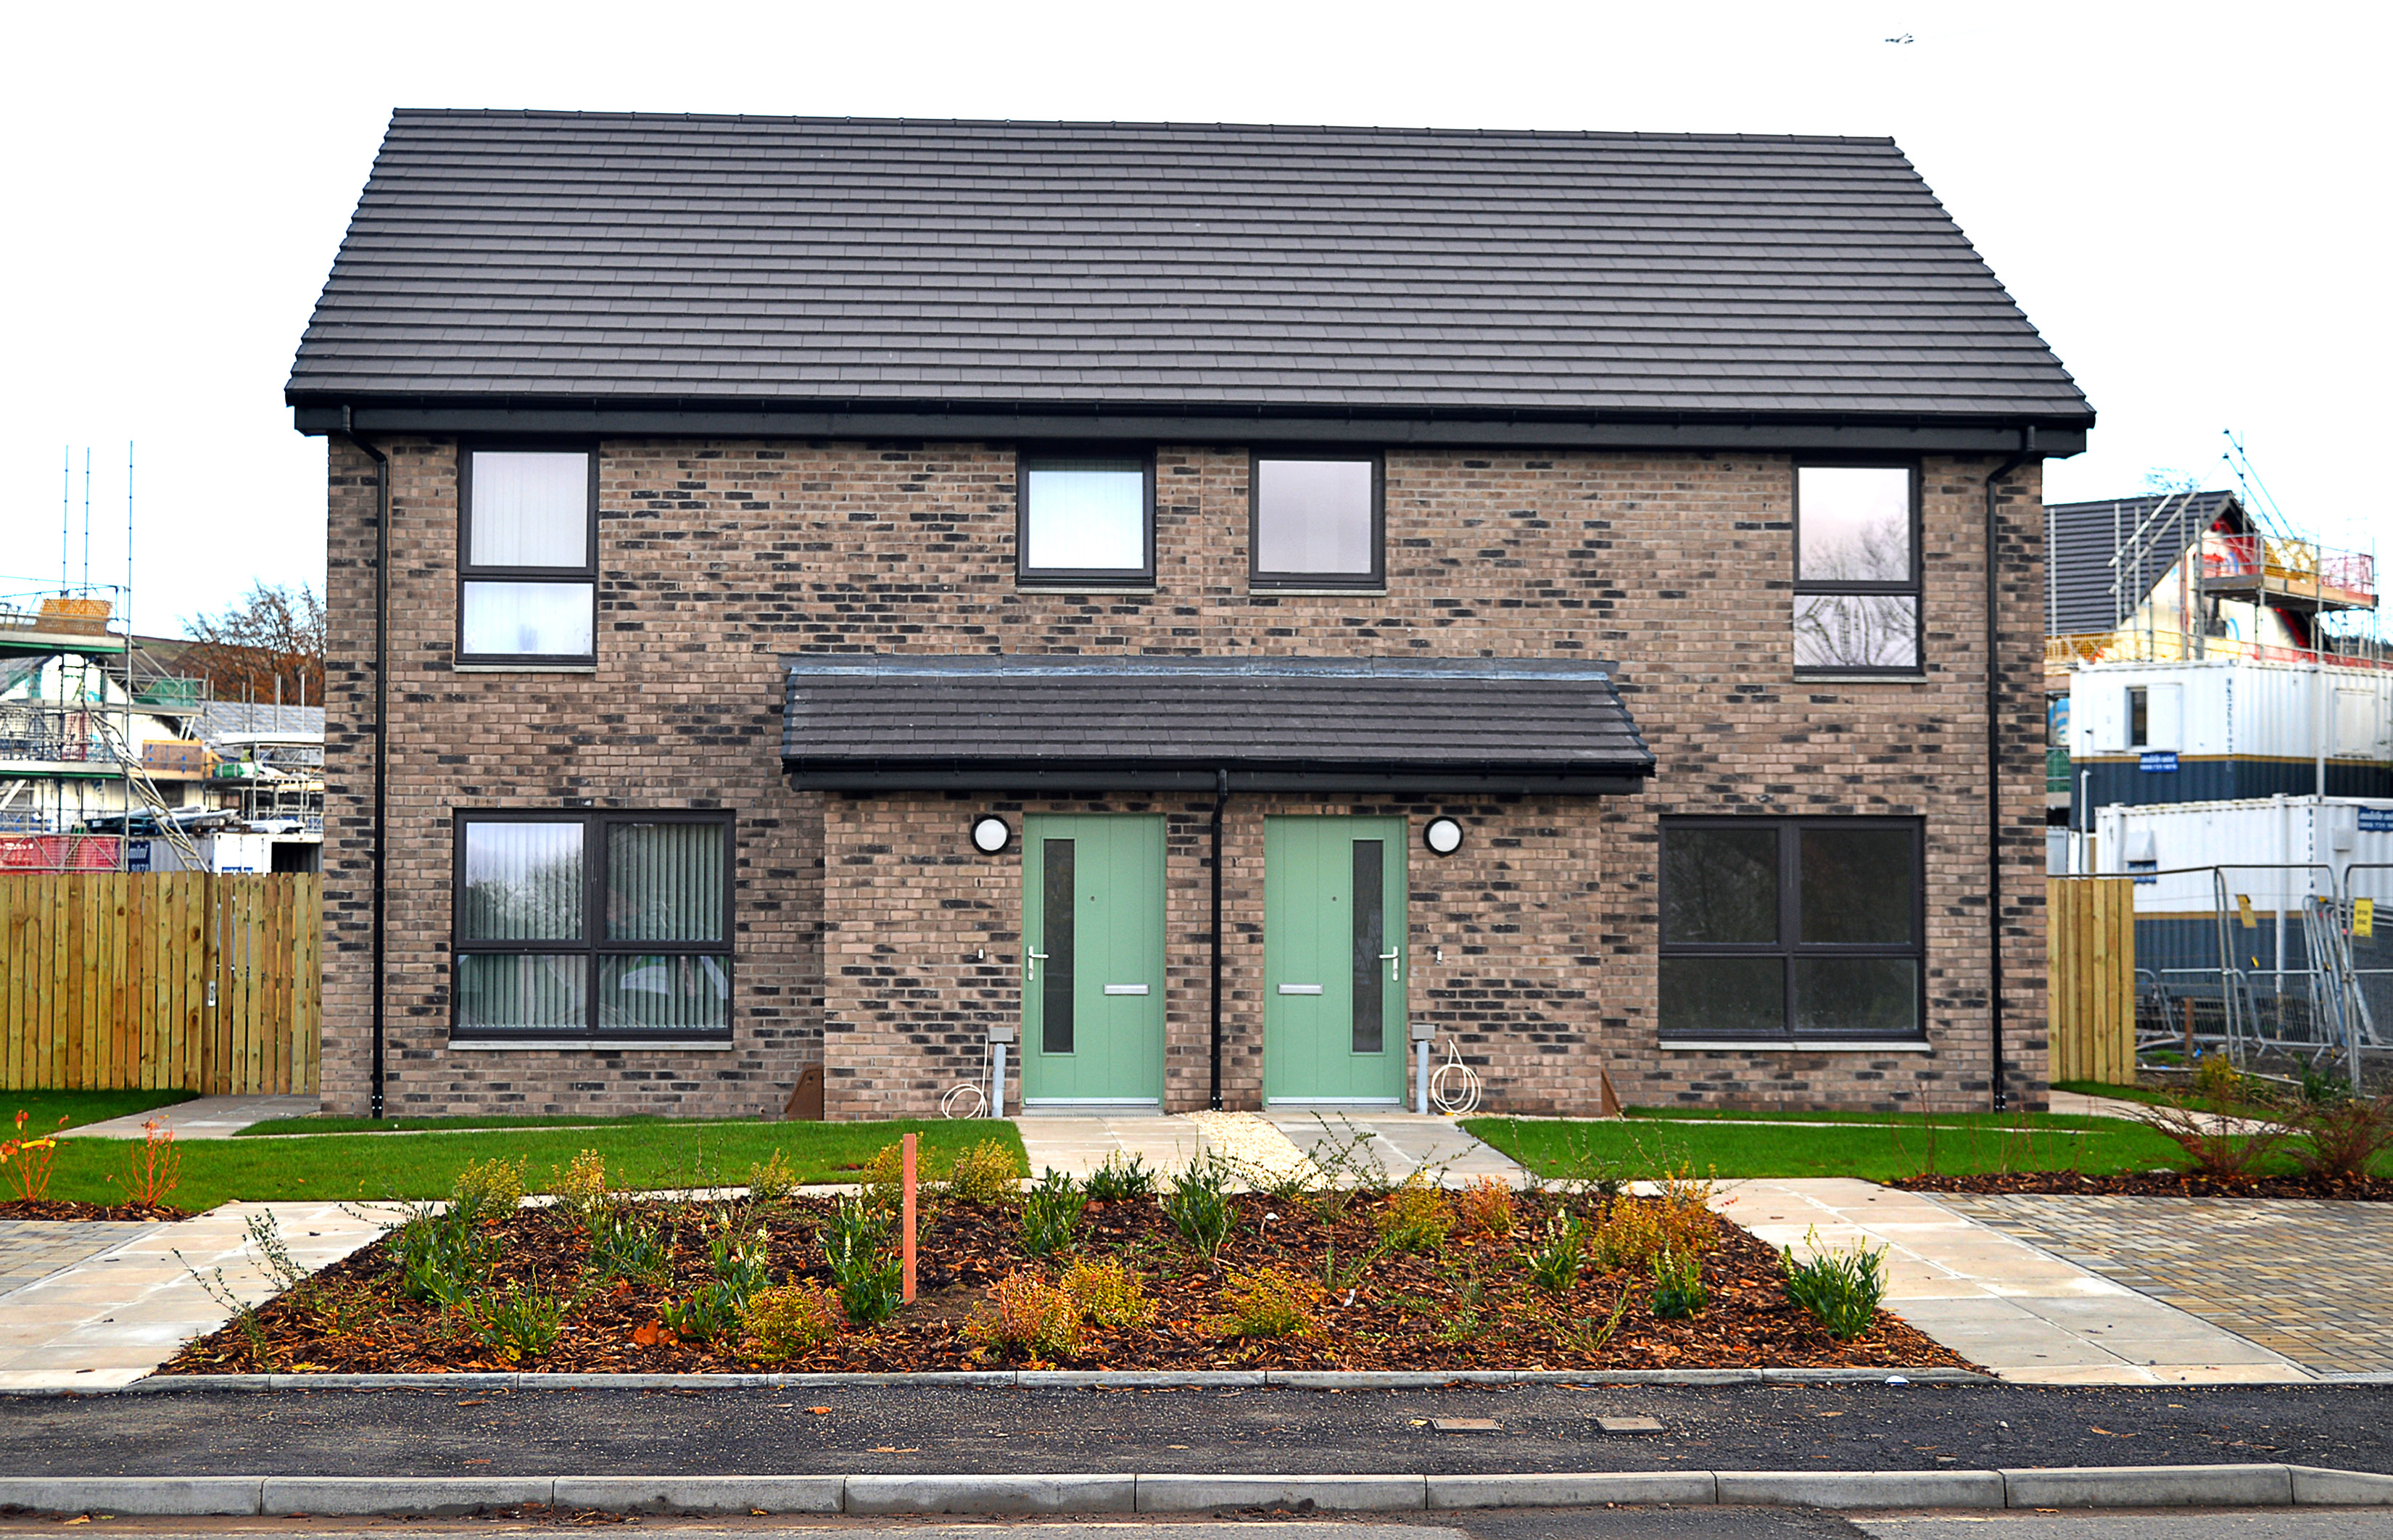 New design standard for West Dunbartonshire Council homes